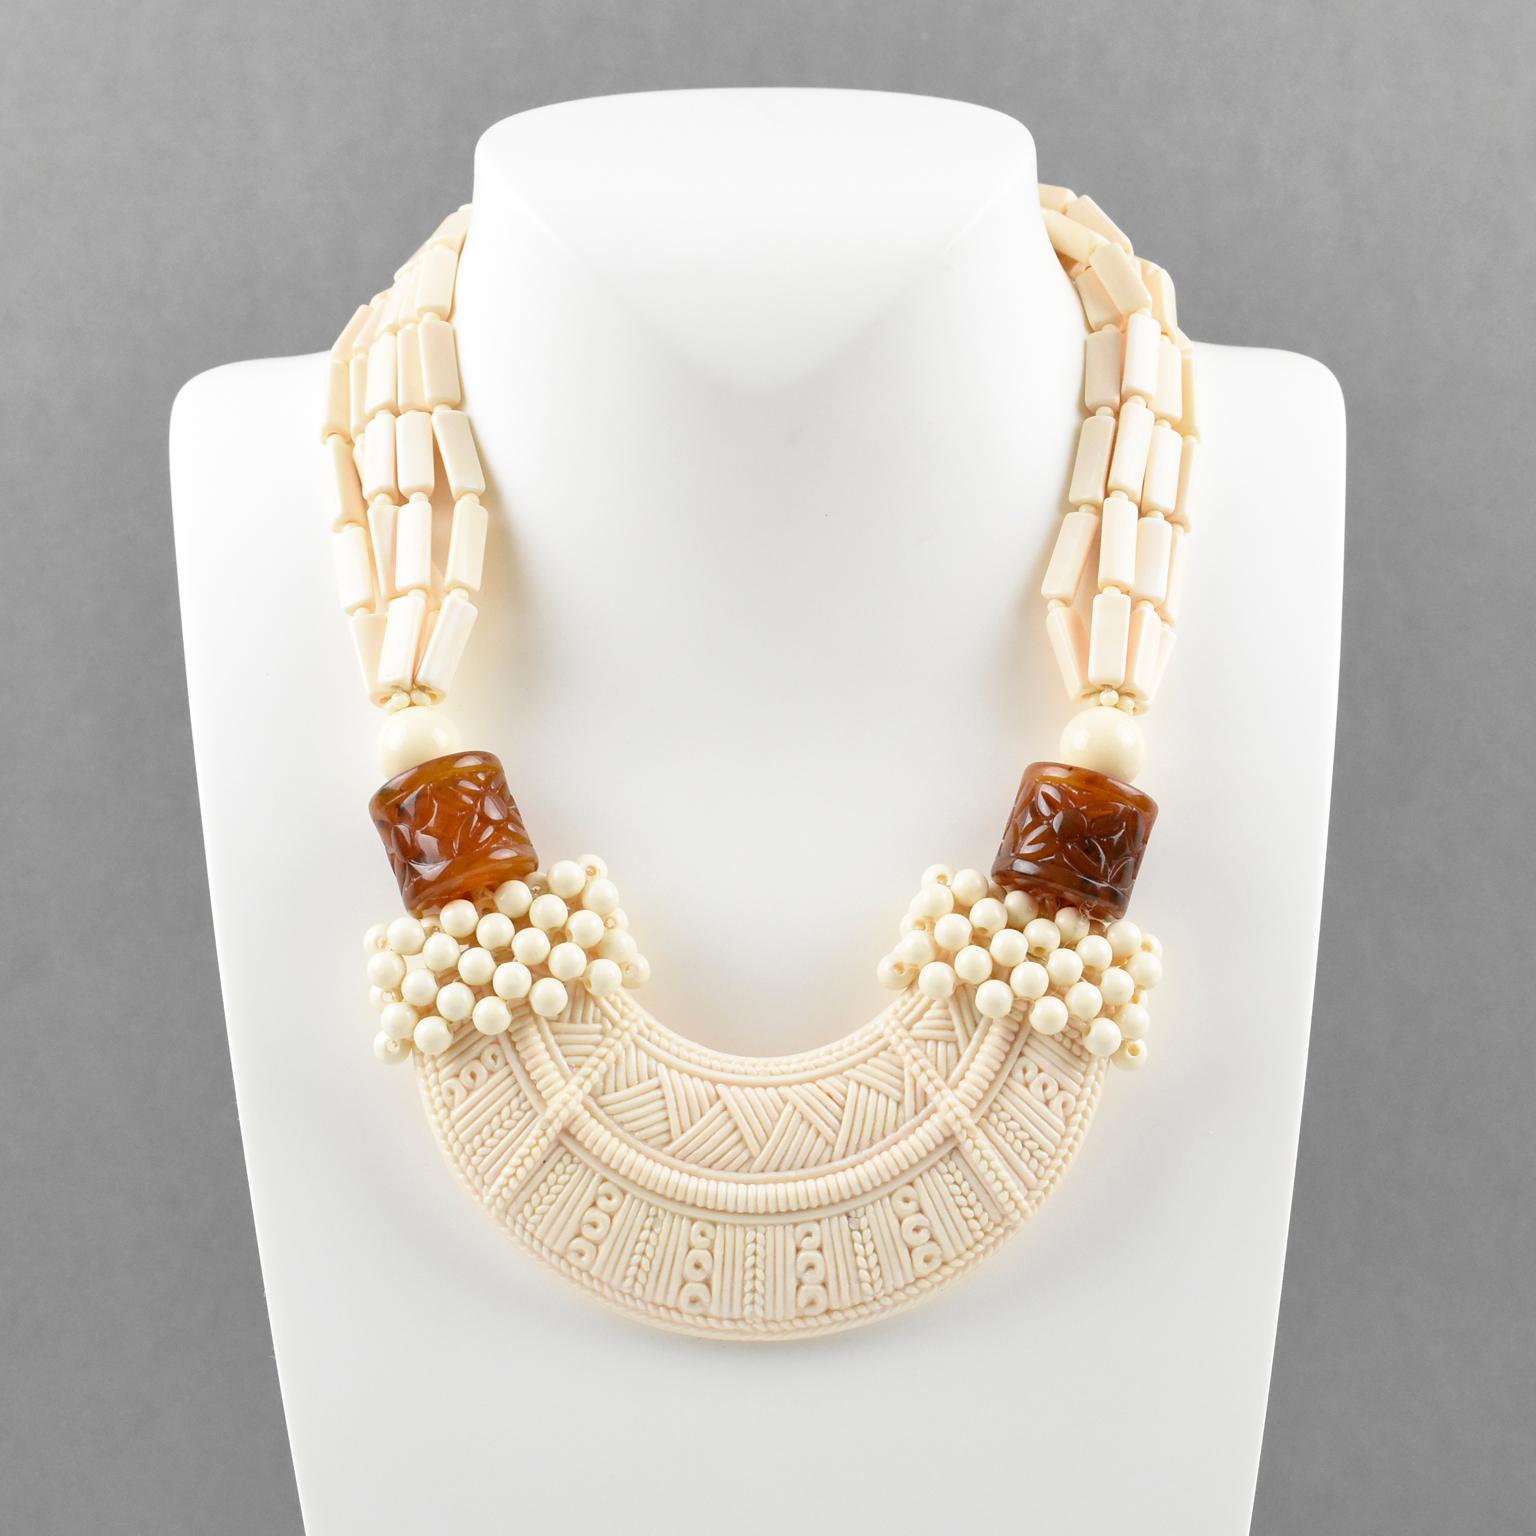 Modern Angela Caputi Sculptural Tribal Off-white and Brown Beaded Choker Necklace